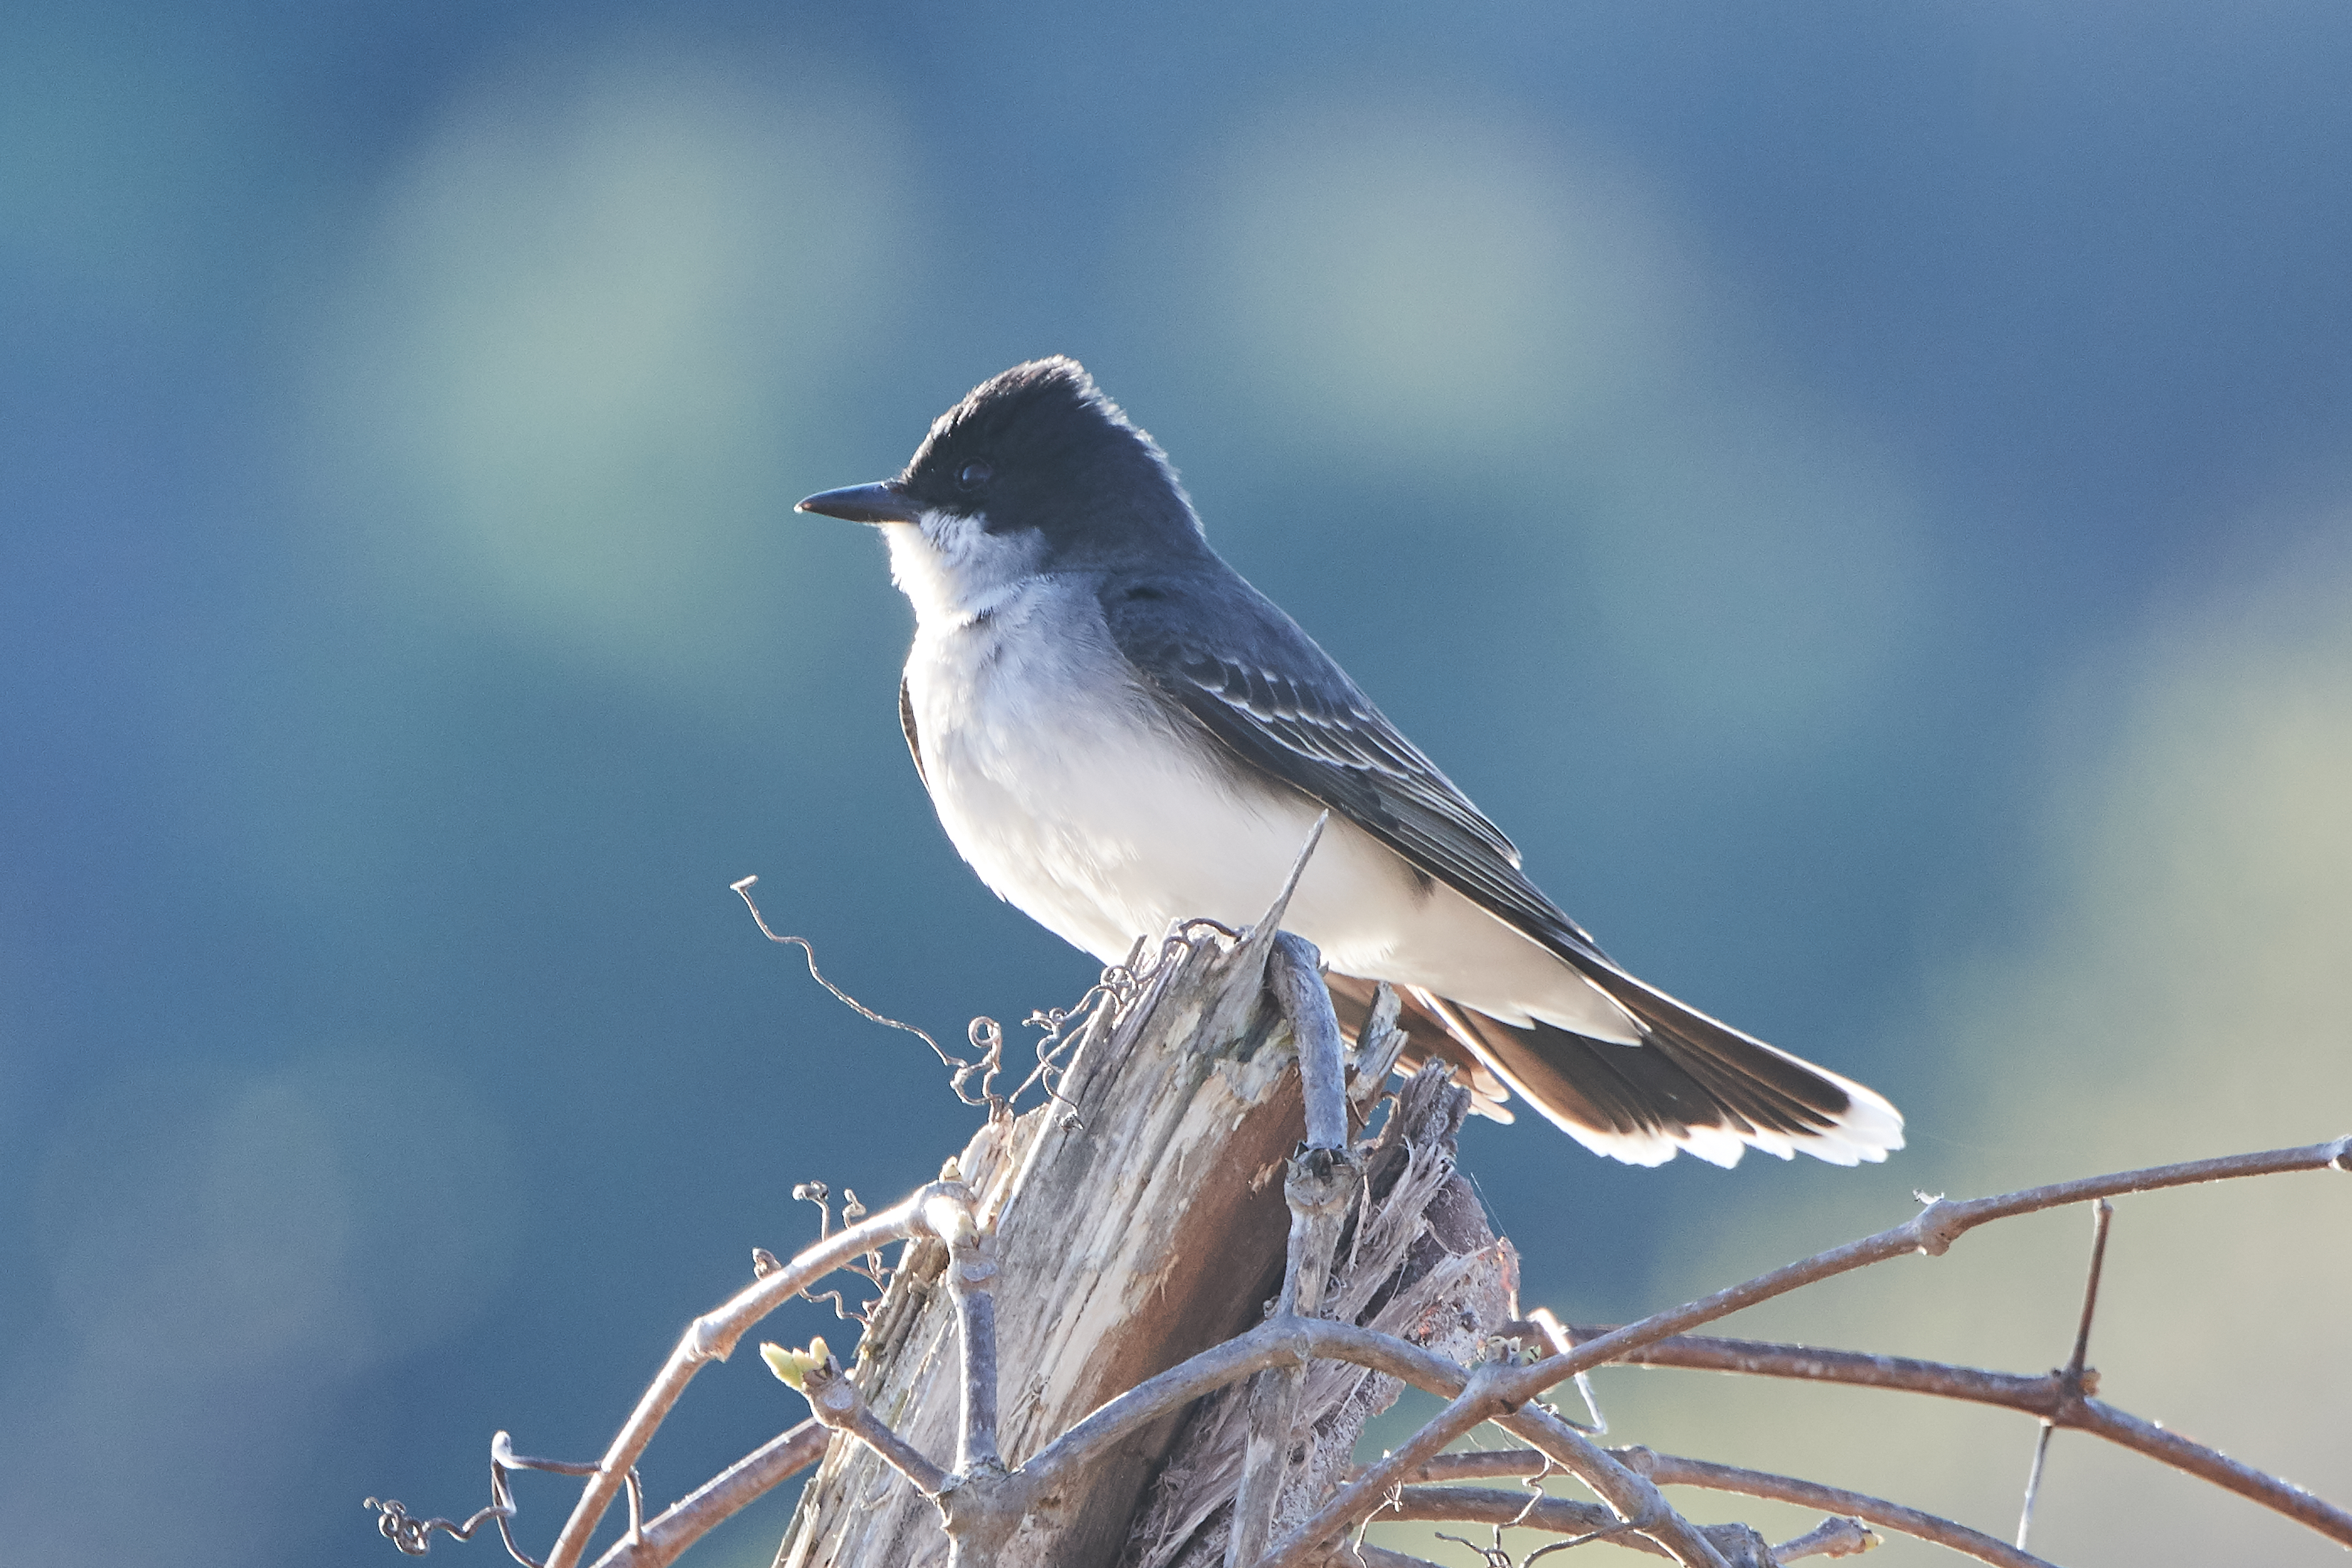 Eastern Kingbird (c) 2018 John Sutton. All rights reserved.